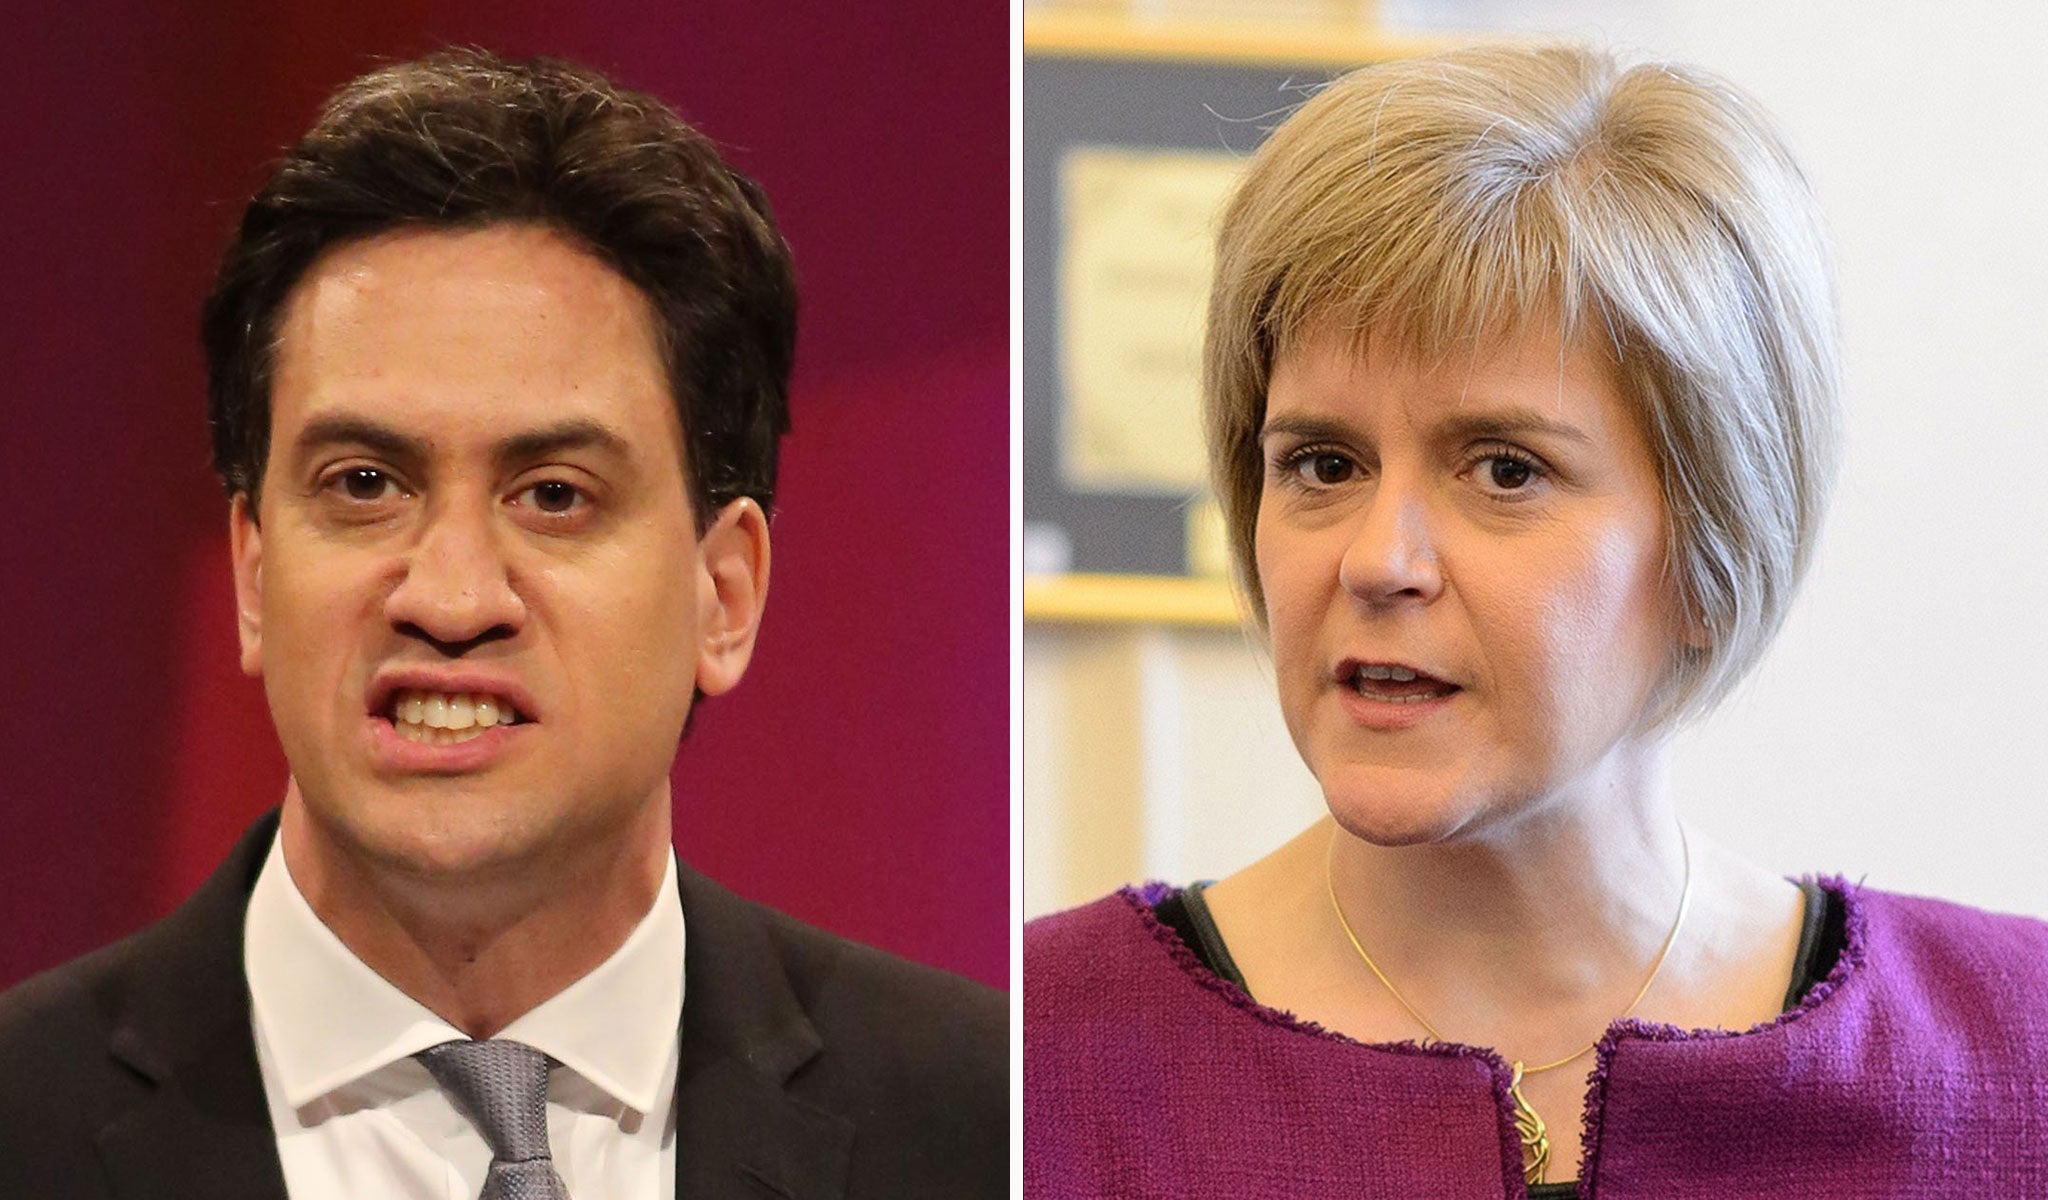 Nicola Sturgeon has said Ed Miliband has ‘big questions’ to answer over his poor approval ratings in Scotland